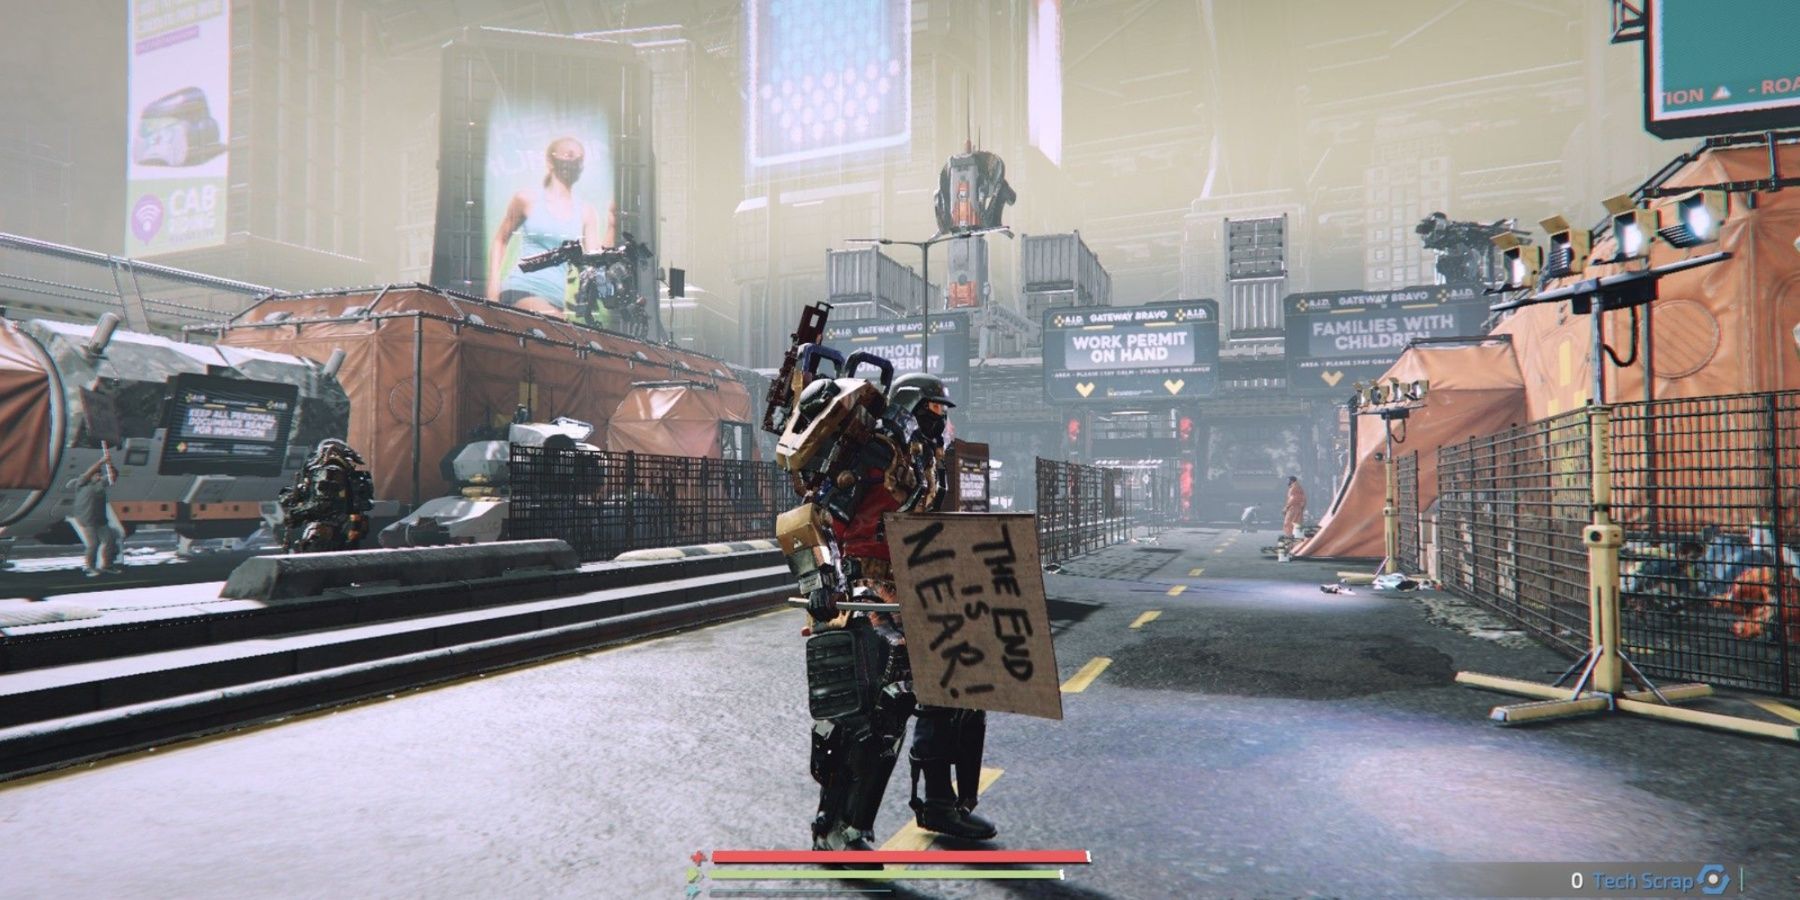 A man standing in the middle of a room holding a sign reading The end is near